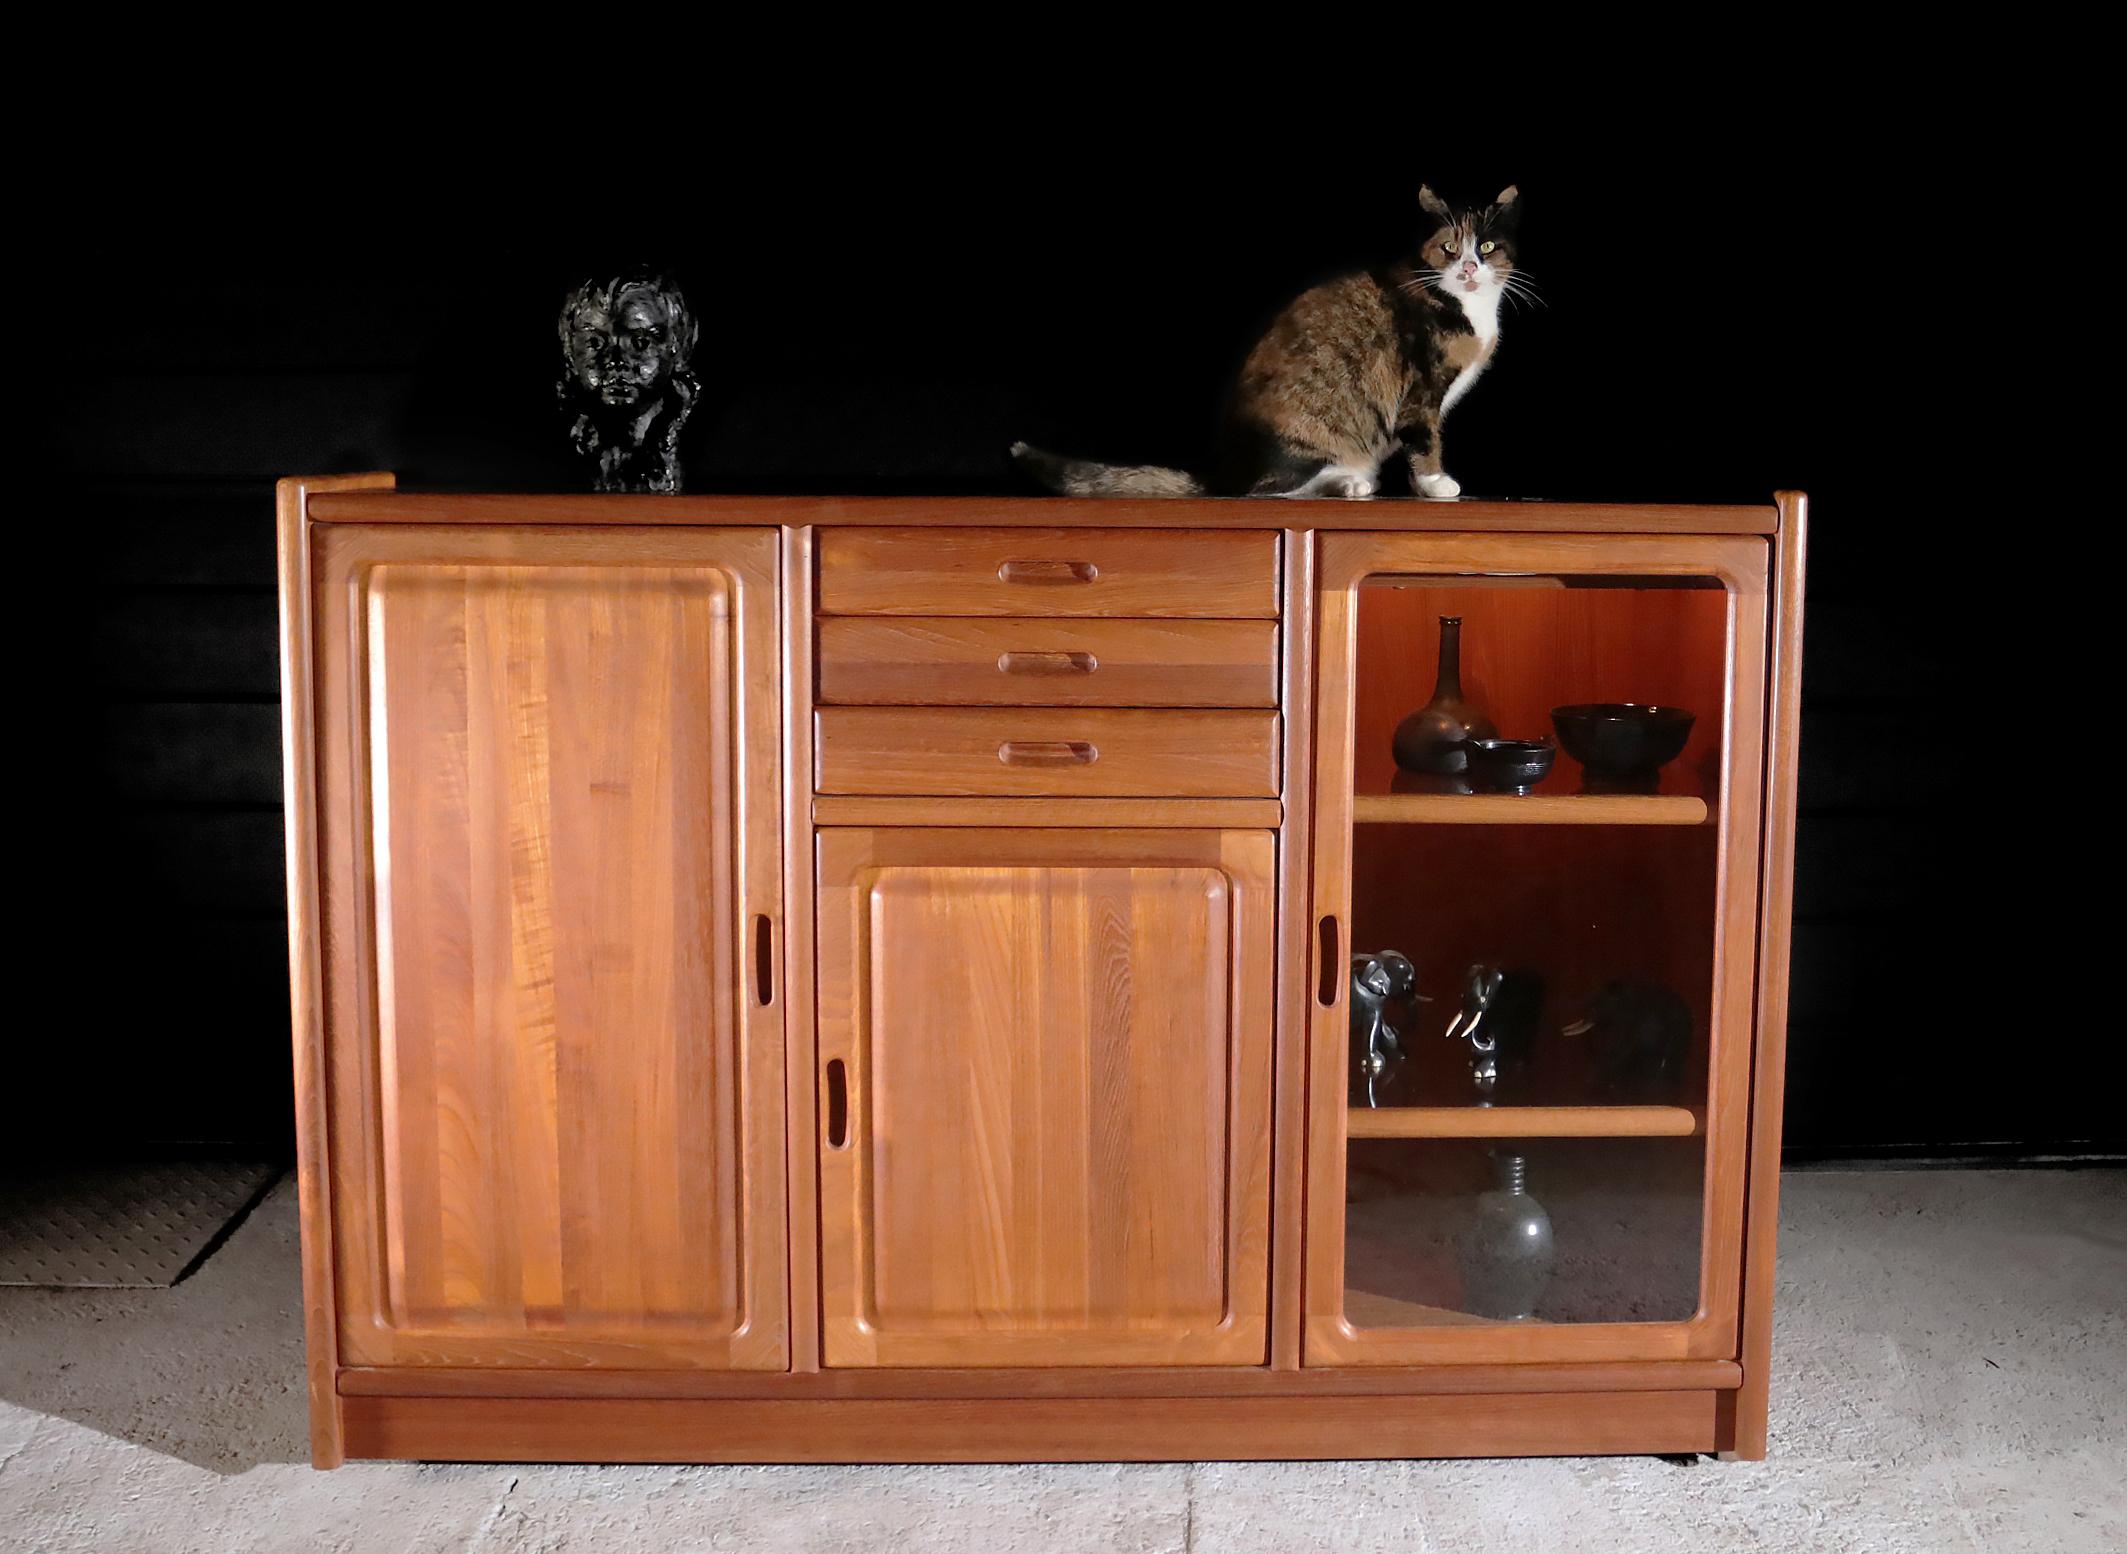 Danishs design Frederiksborg highboard made by Dyrlund in 1995.
Since 1960 Dyrlund has been manufacturing furniture of the highest quality.
Dyrlund’s clientele can be found worldwide and includes many Heads of State, a selection of Lords, and